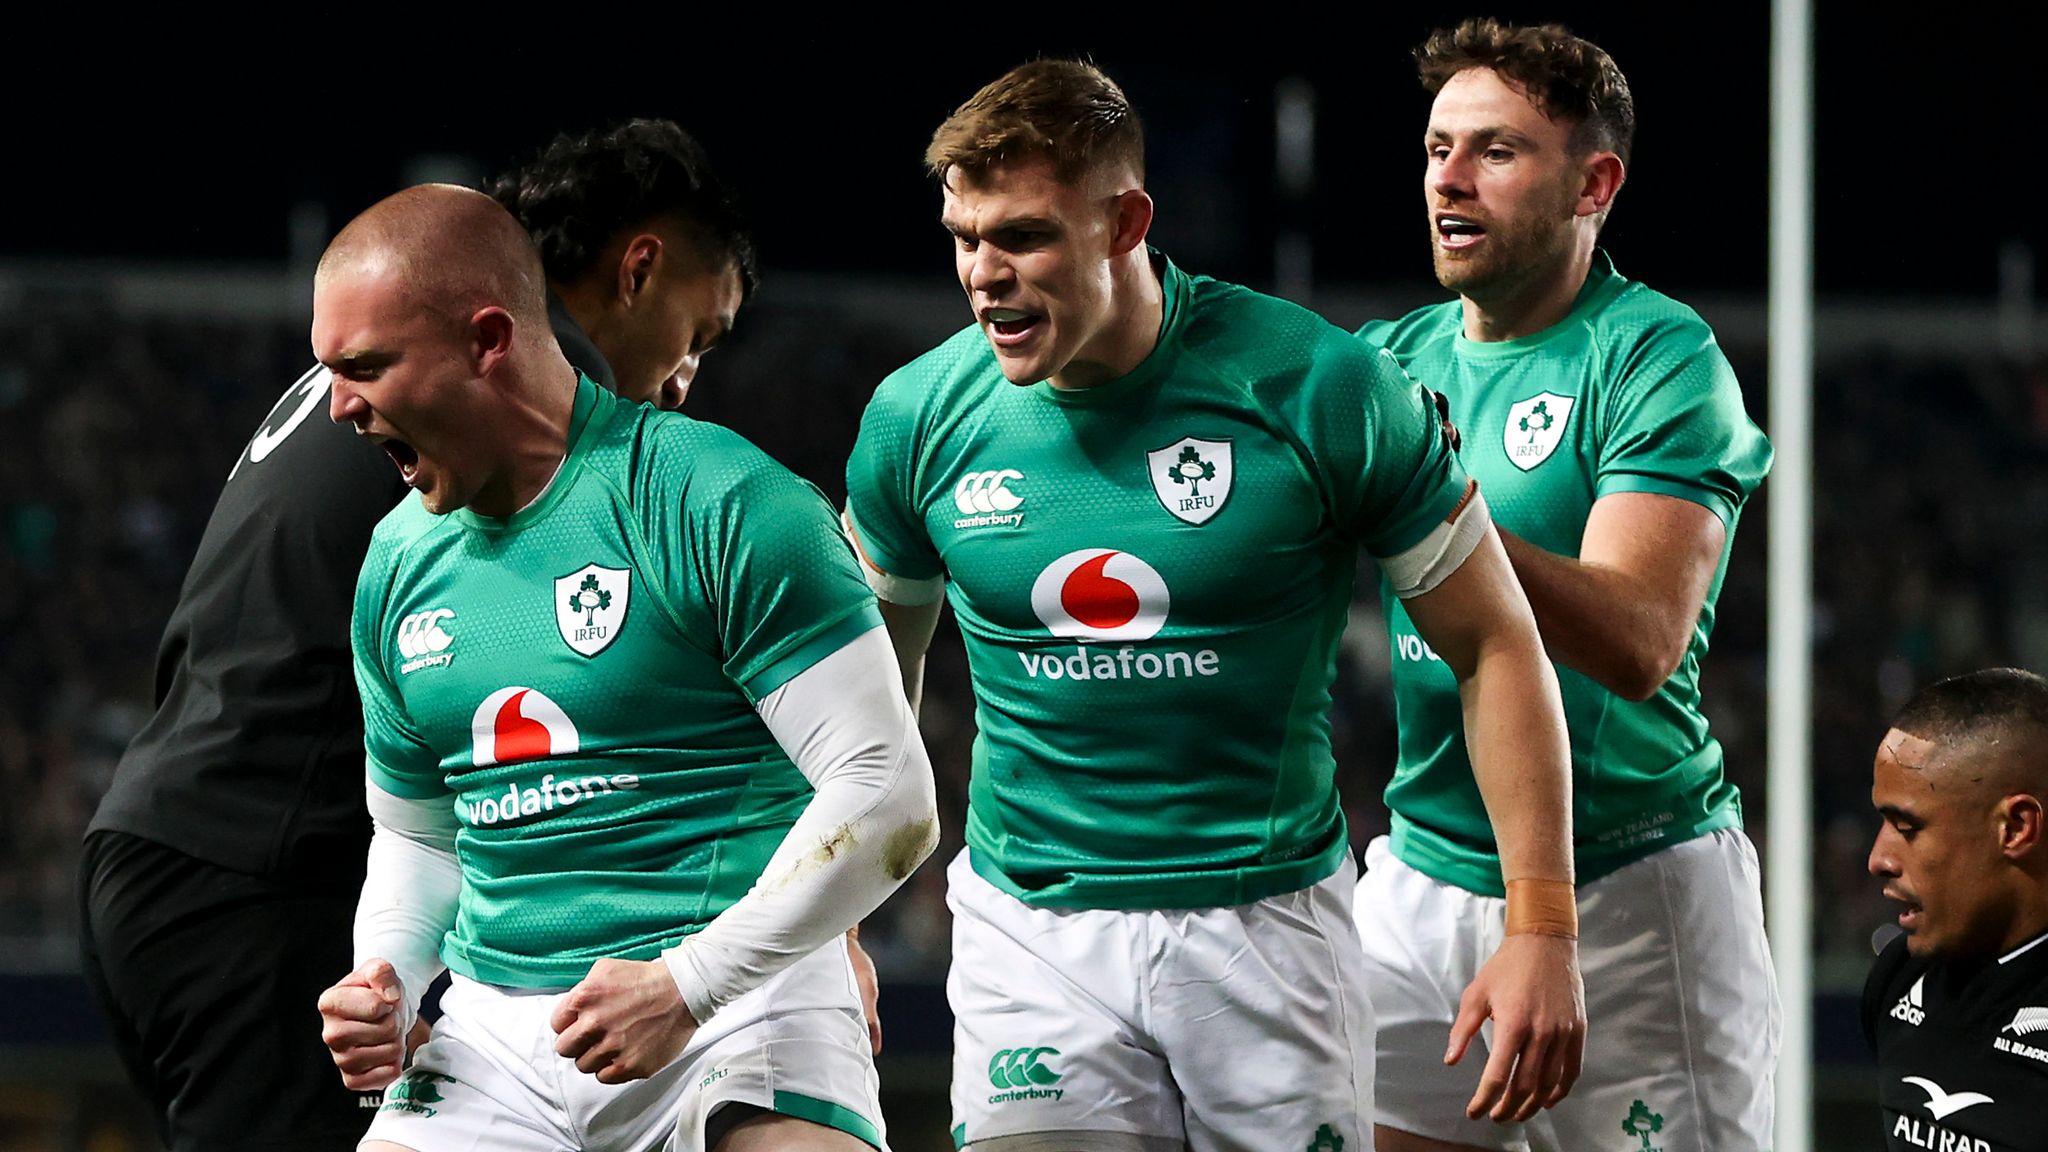 Keith Earls to captain Ireland as Andy Farrell names team to face Maori All Blacks Rugby Union News Sky Sports